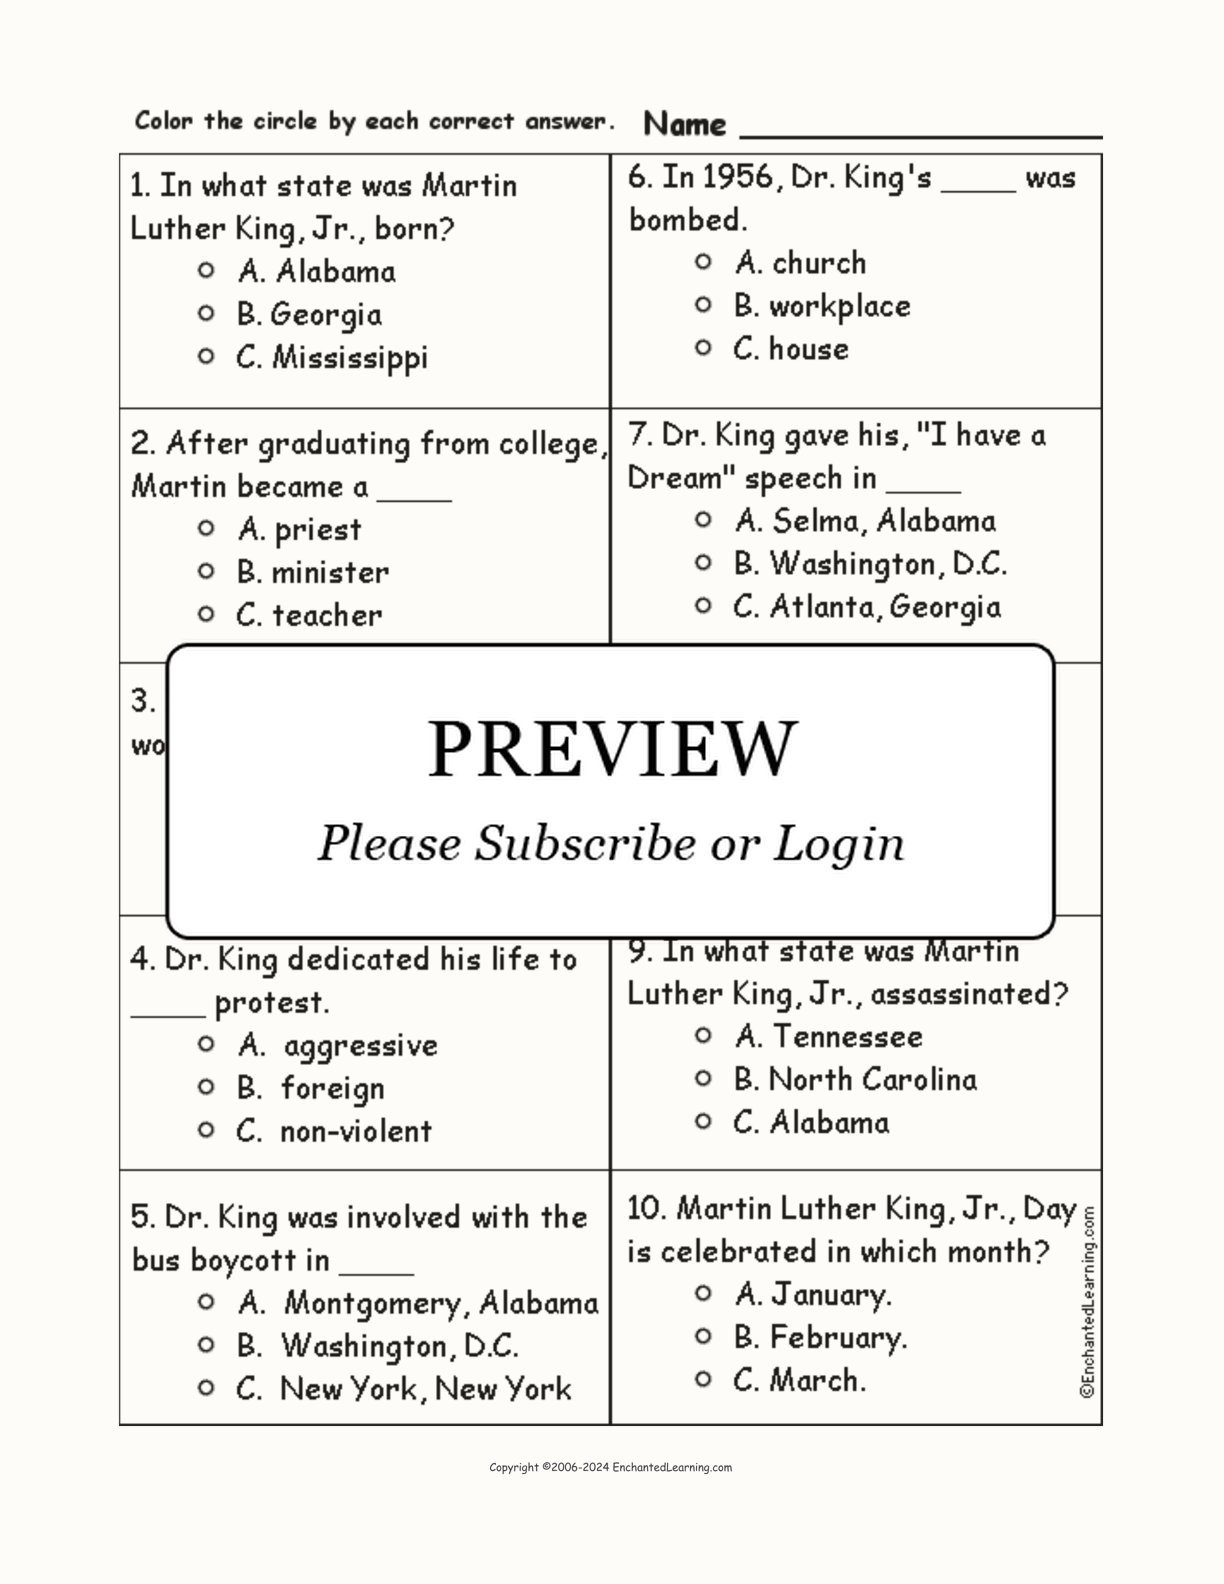 Martin Luther King, Jr., Quiz interactive worksheet page 1